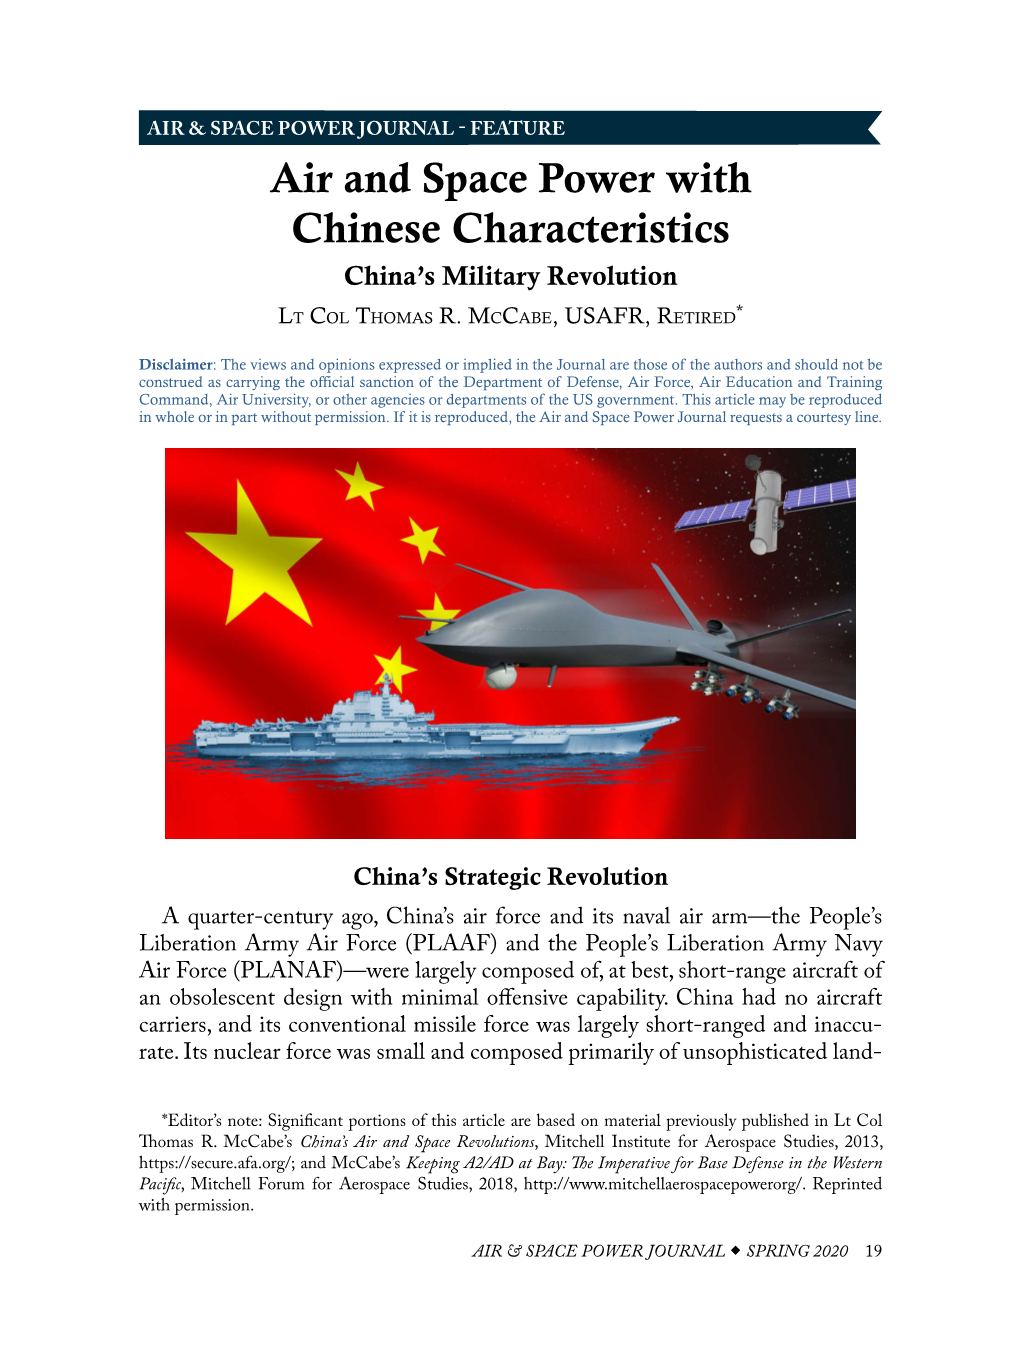 Air and Space Power with Chinese Characteristics: China's Military Revolution